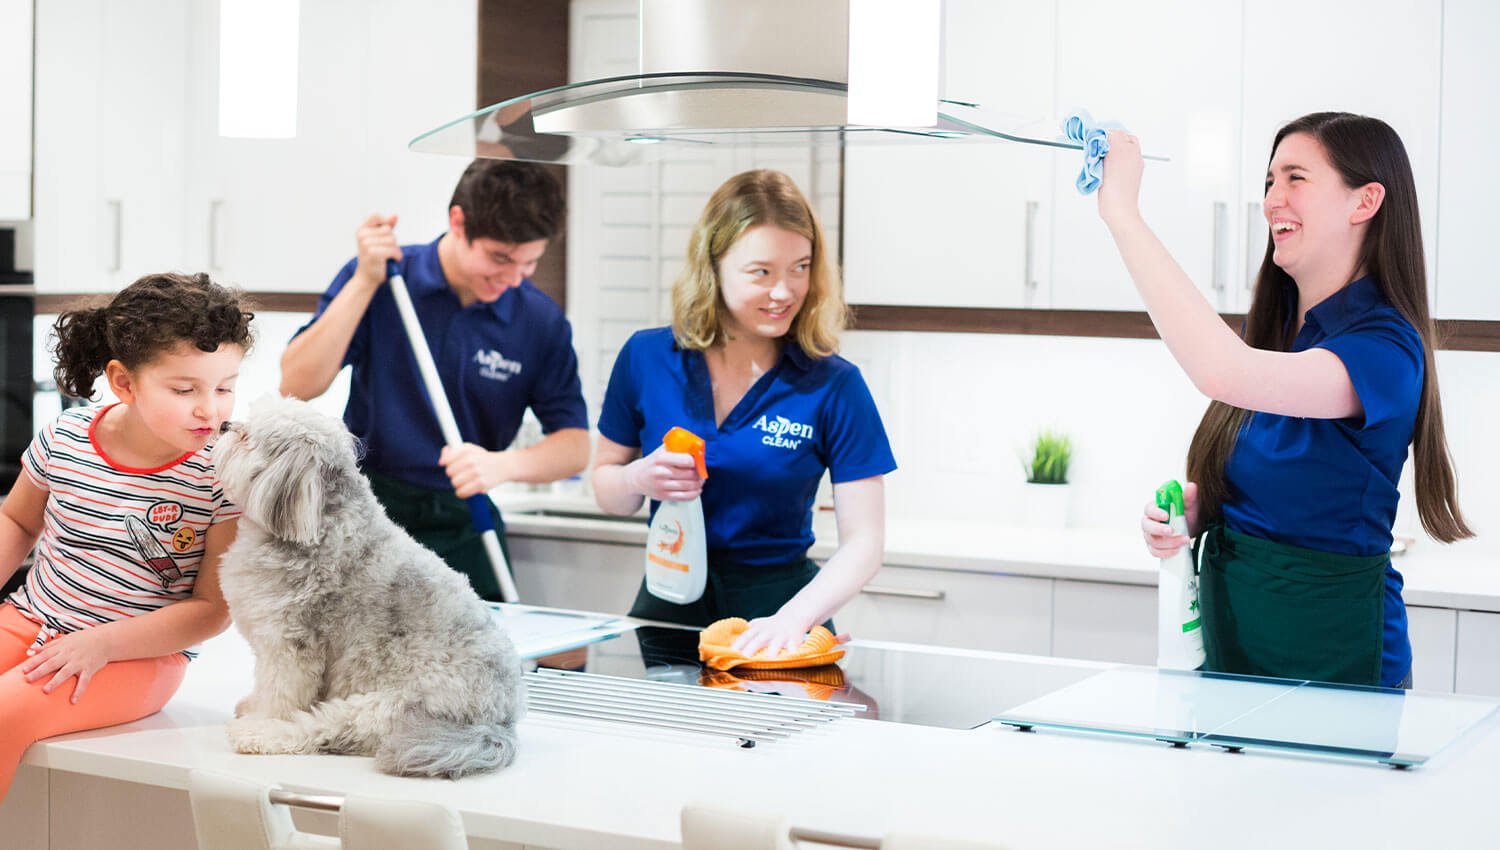 Building Cleaning Services – Eco Pure Services